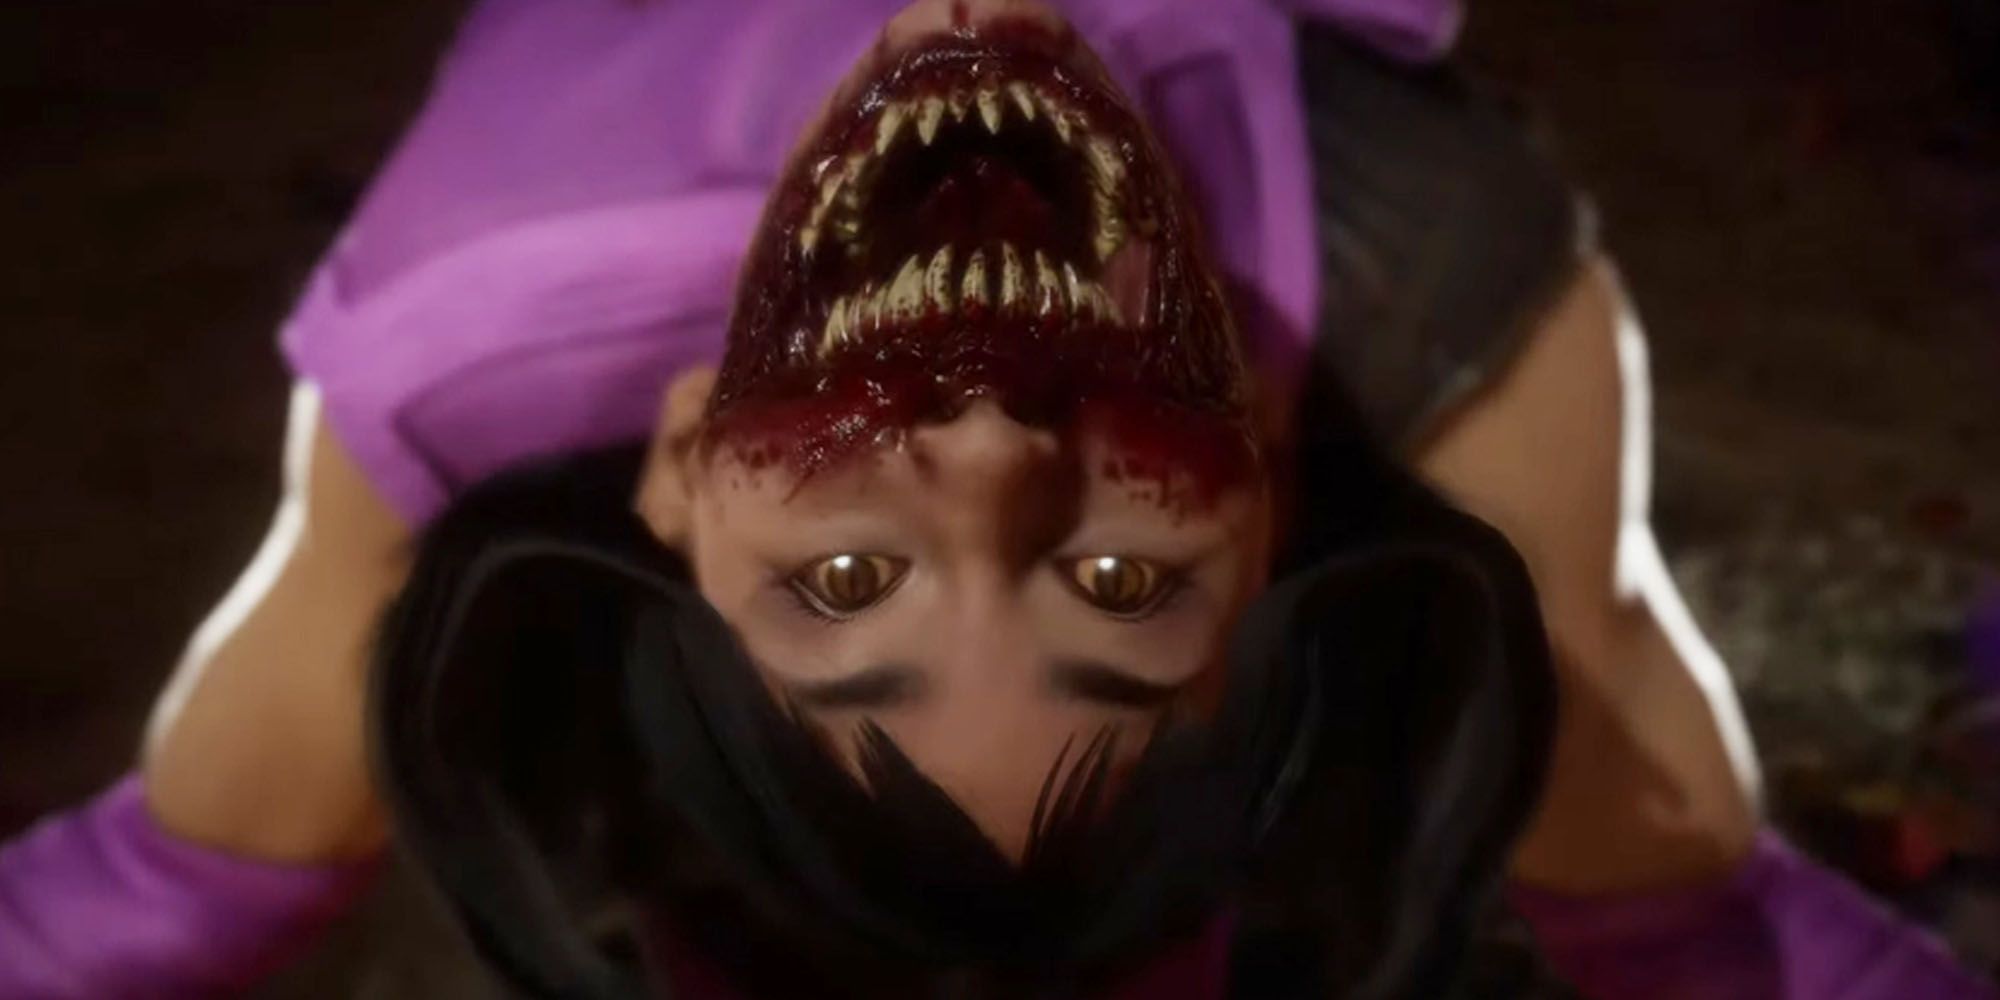 Mileena in Mortal Kombat 11 bending backwards toward the camera, showing her mouth covered in blood with spiked teeth